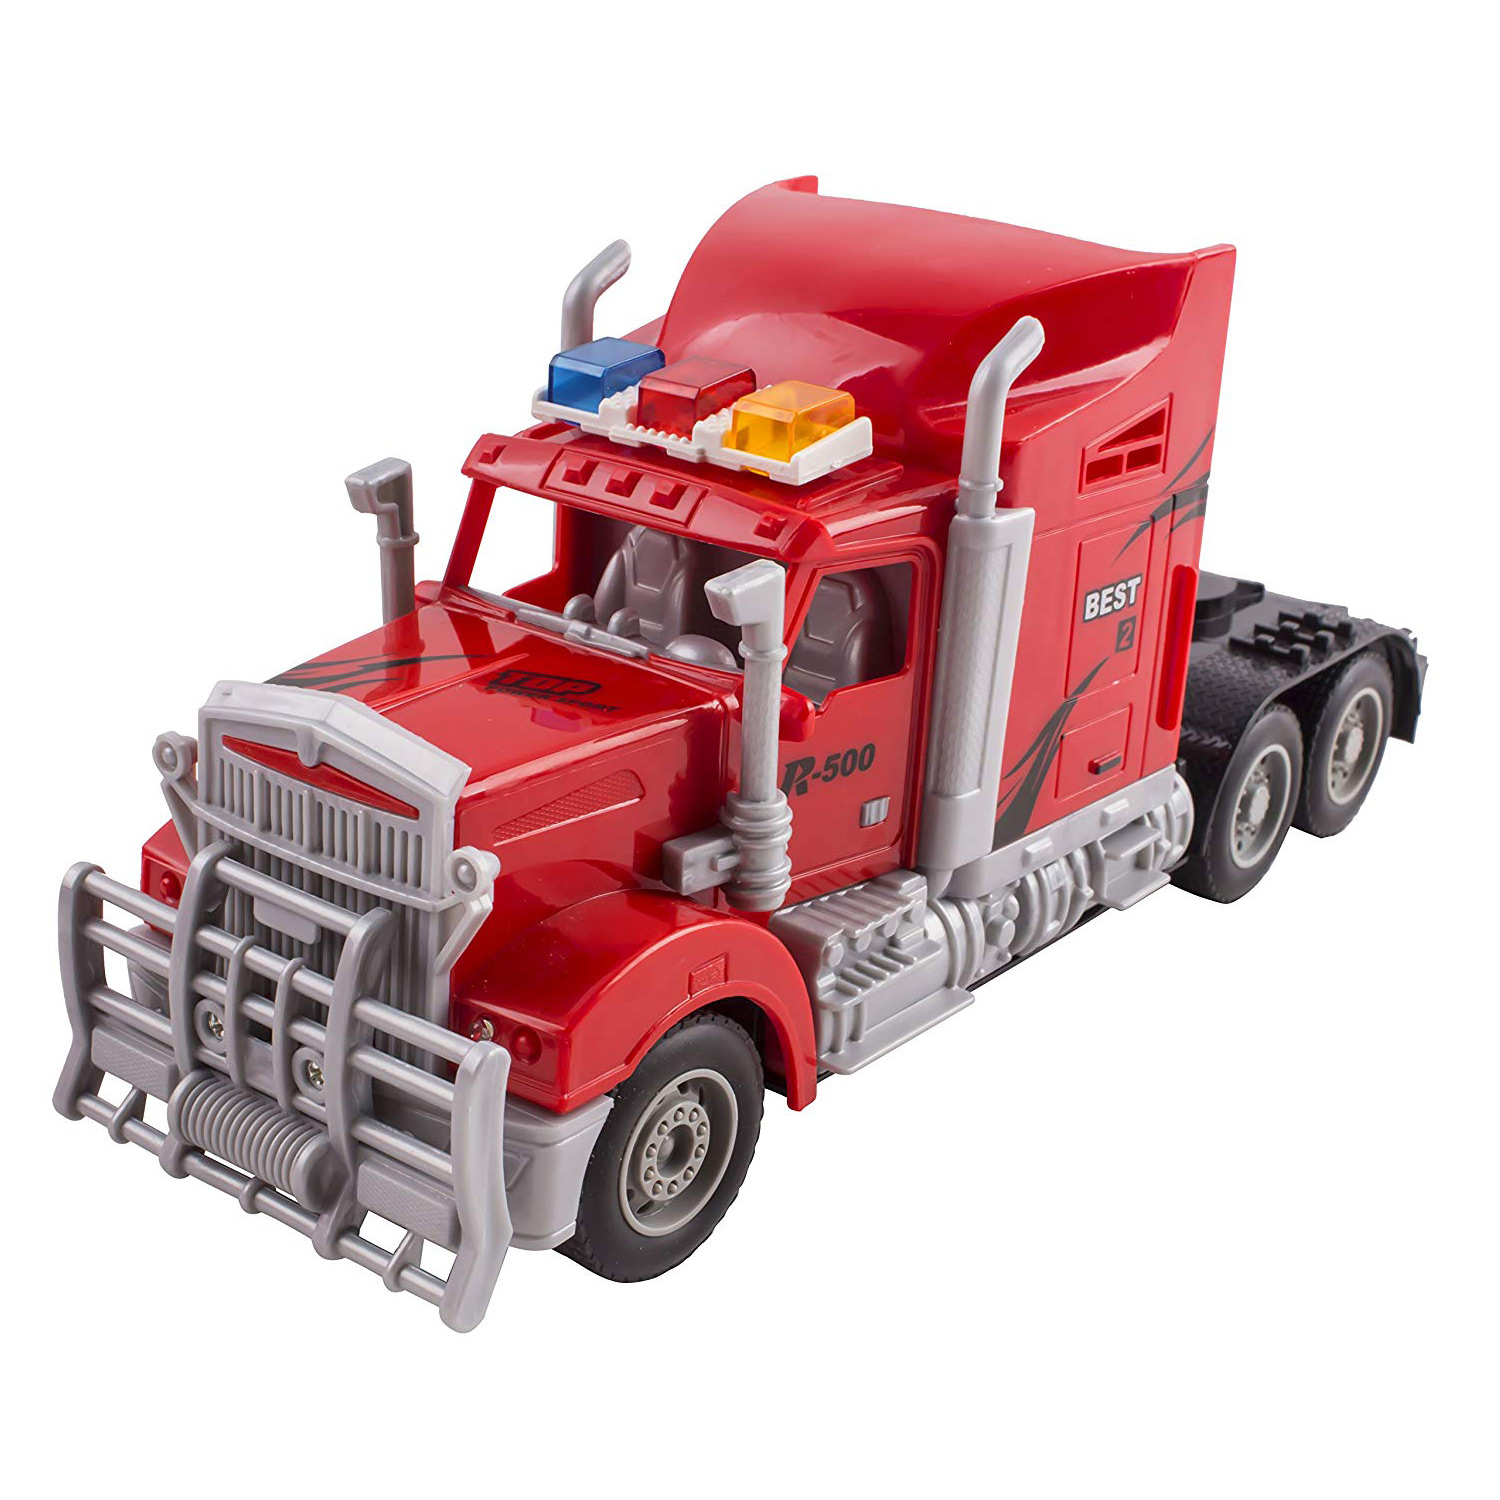 Toy Semi Truck Trailer 23 Electric Hauler Remote Control RC Childrens Transporter Ready To Run Full Cargo Perfect Big Rig For Kids Toys Red